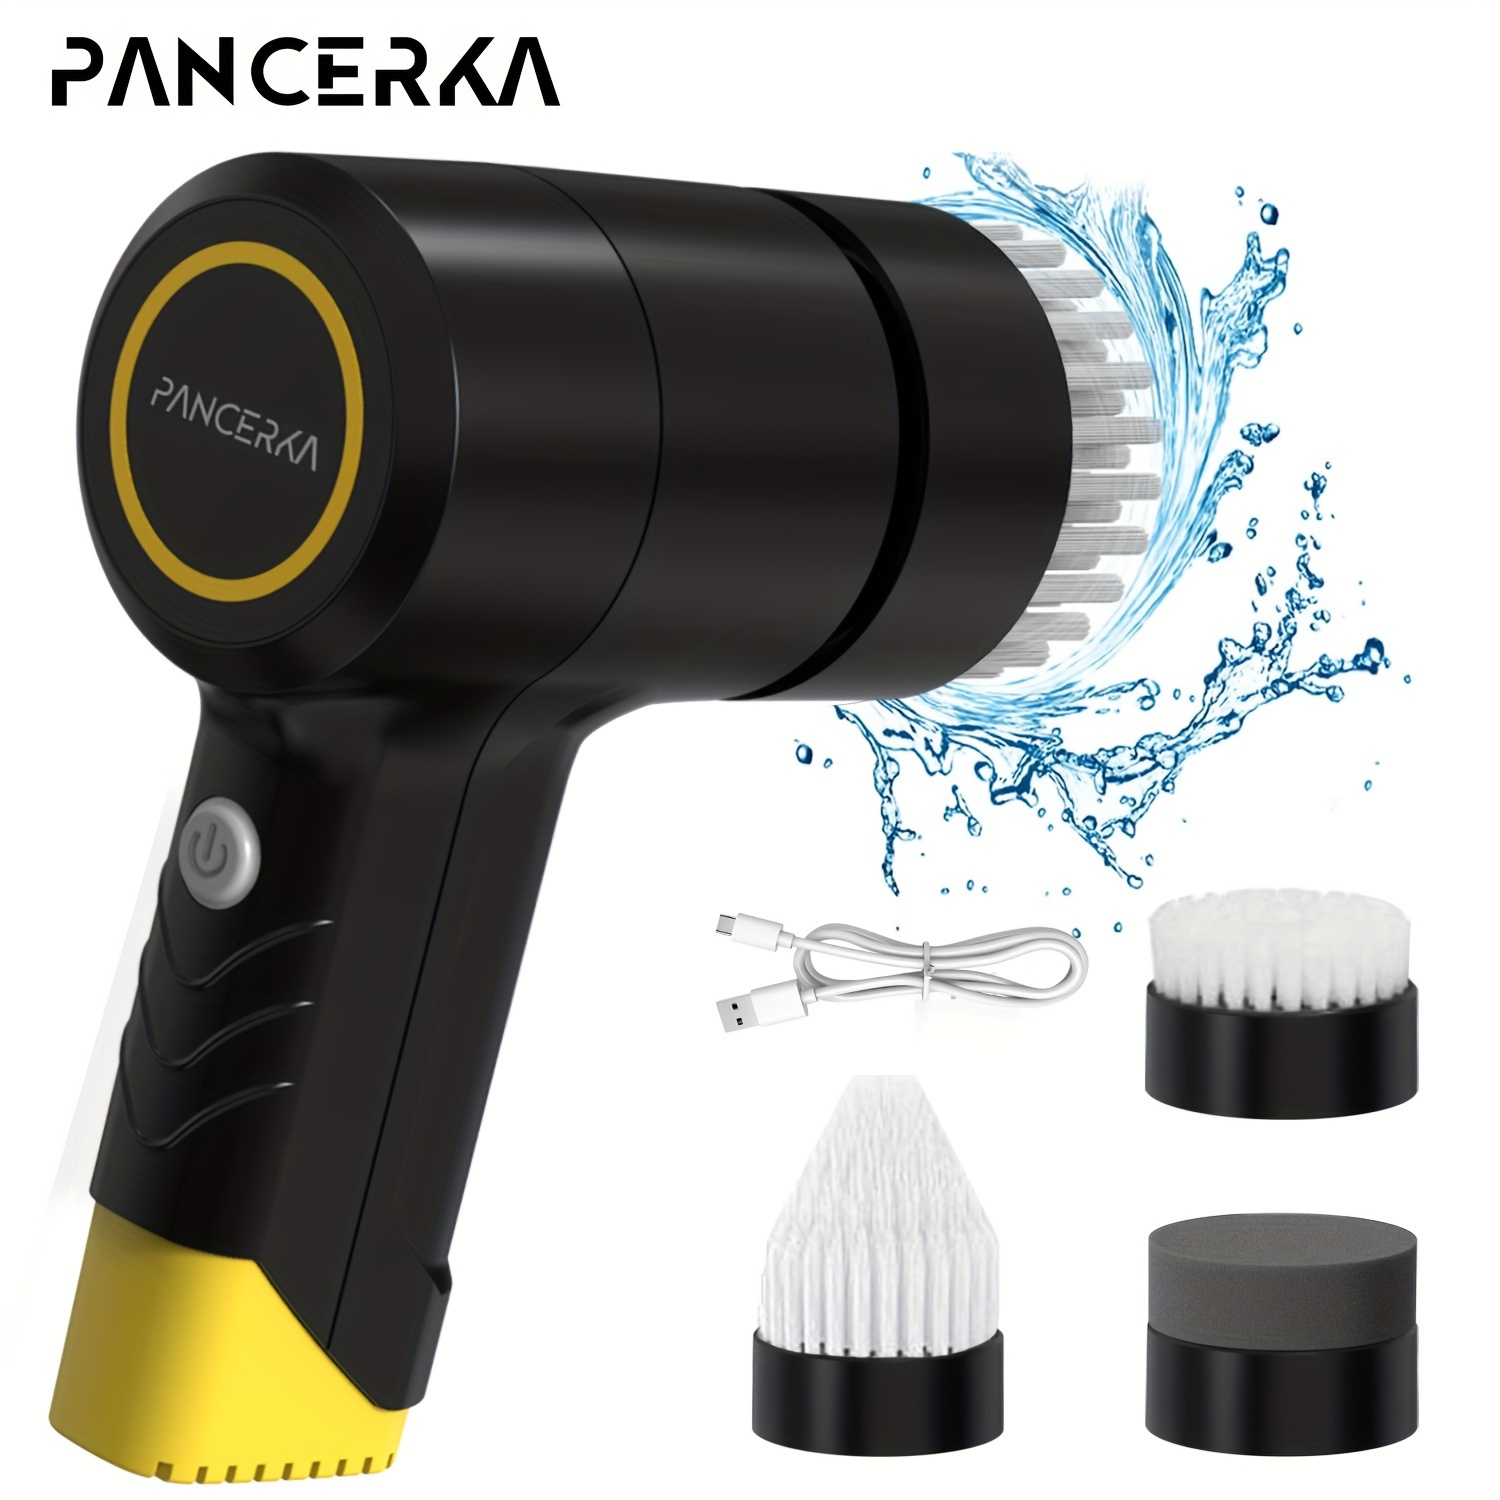 

Pancerka Electric Spin Scrubber, 2 Speeds Electric Scrubber For Bathroom, 3 Replaceable Heads, Handheld Spin Scrubber With Aperture, Power Shower Scrubber For Cleaning Tile/grout/tub/stove/car/windows